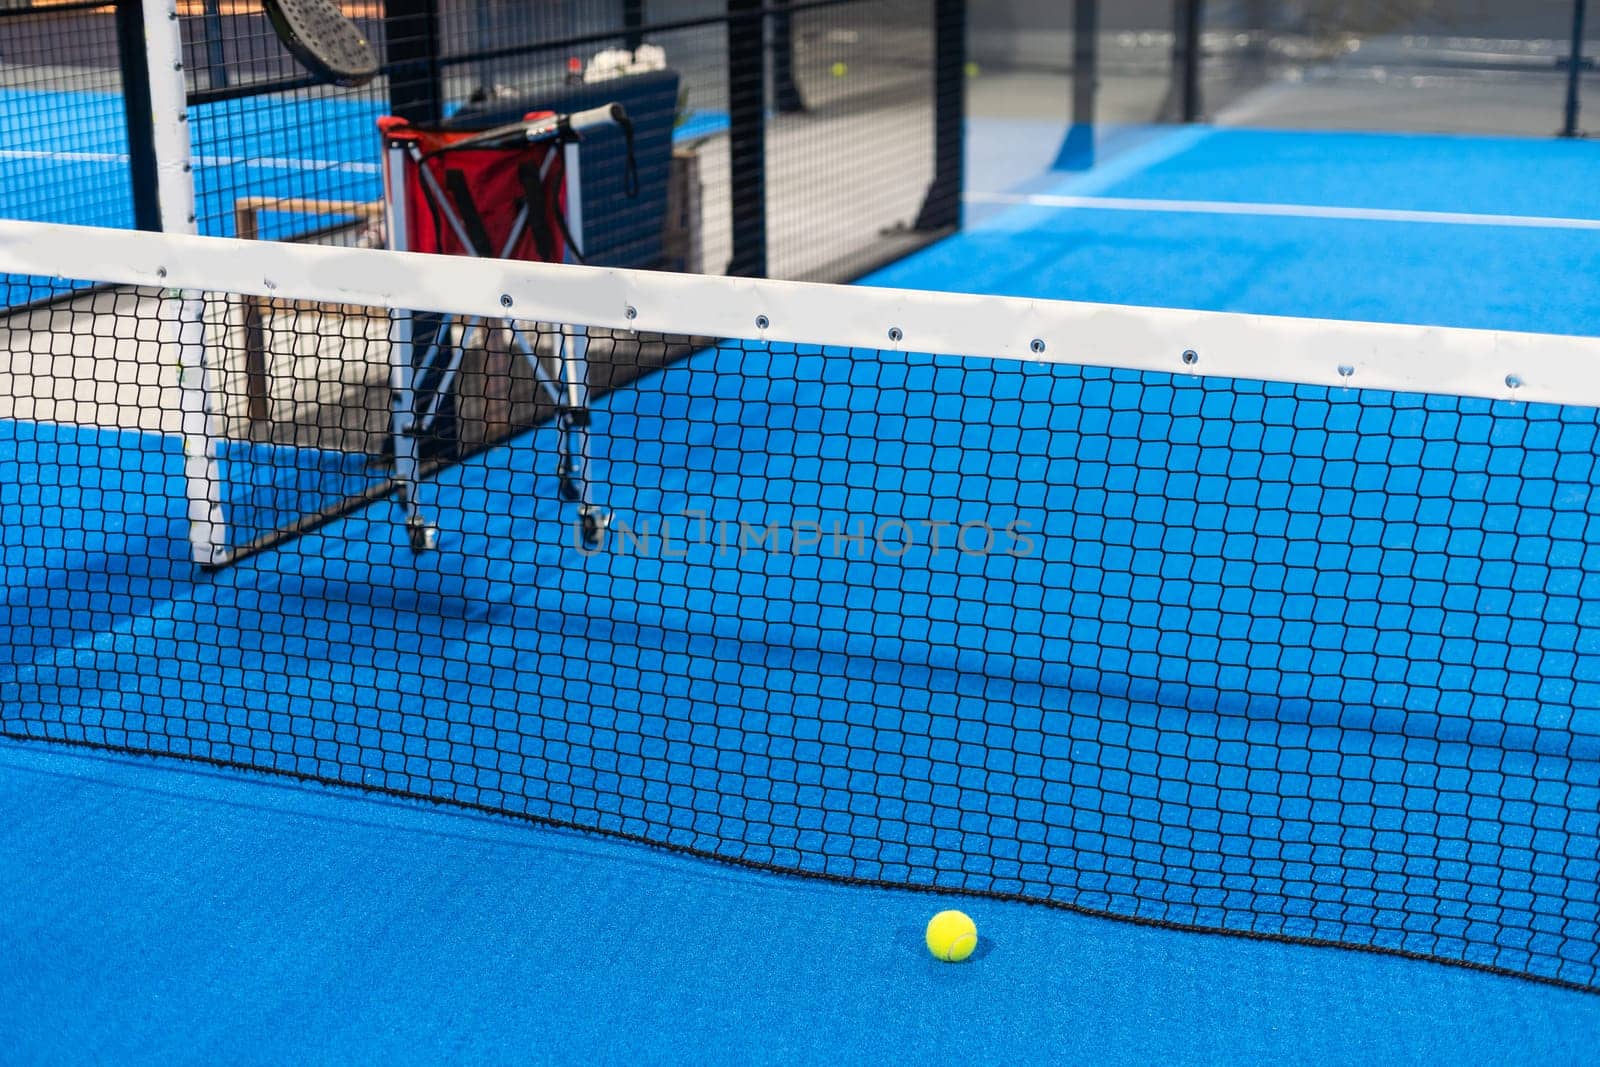 Paddle objects on blue court. High quality photo